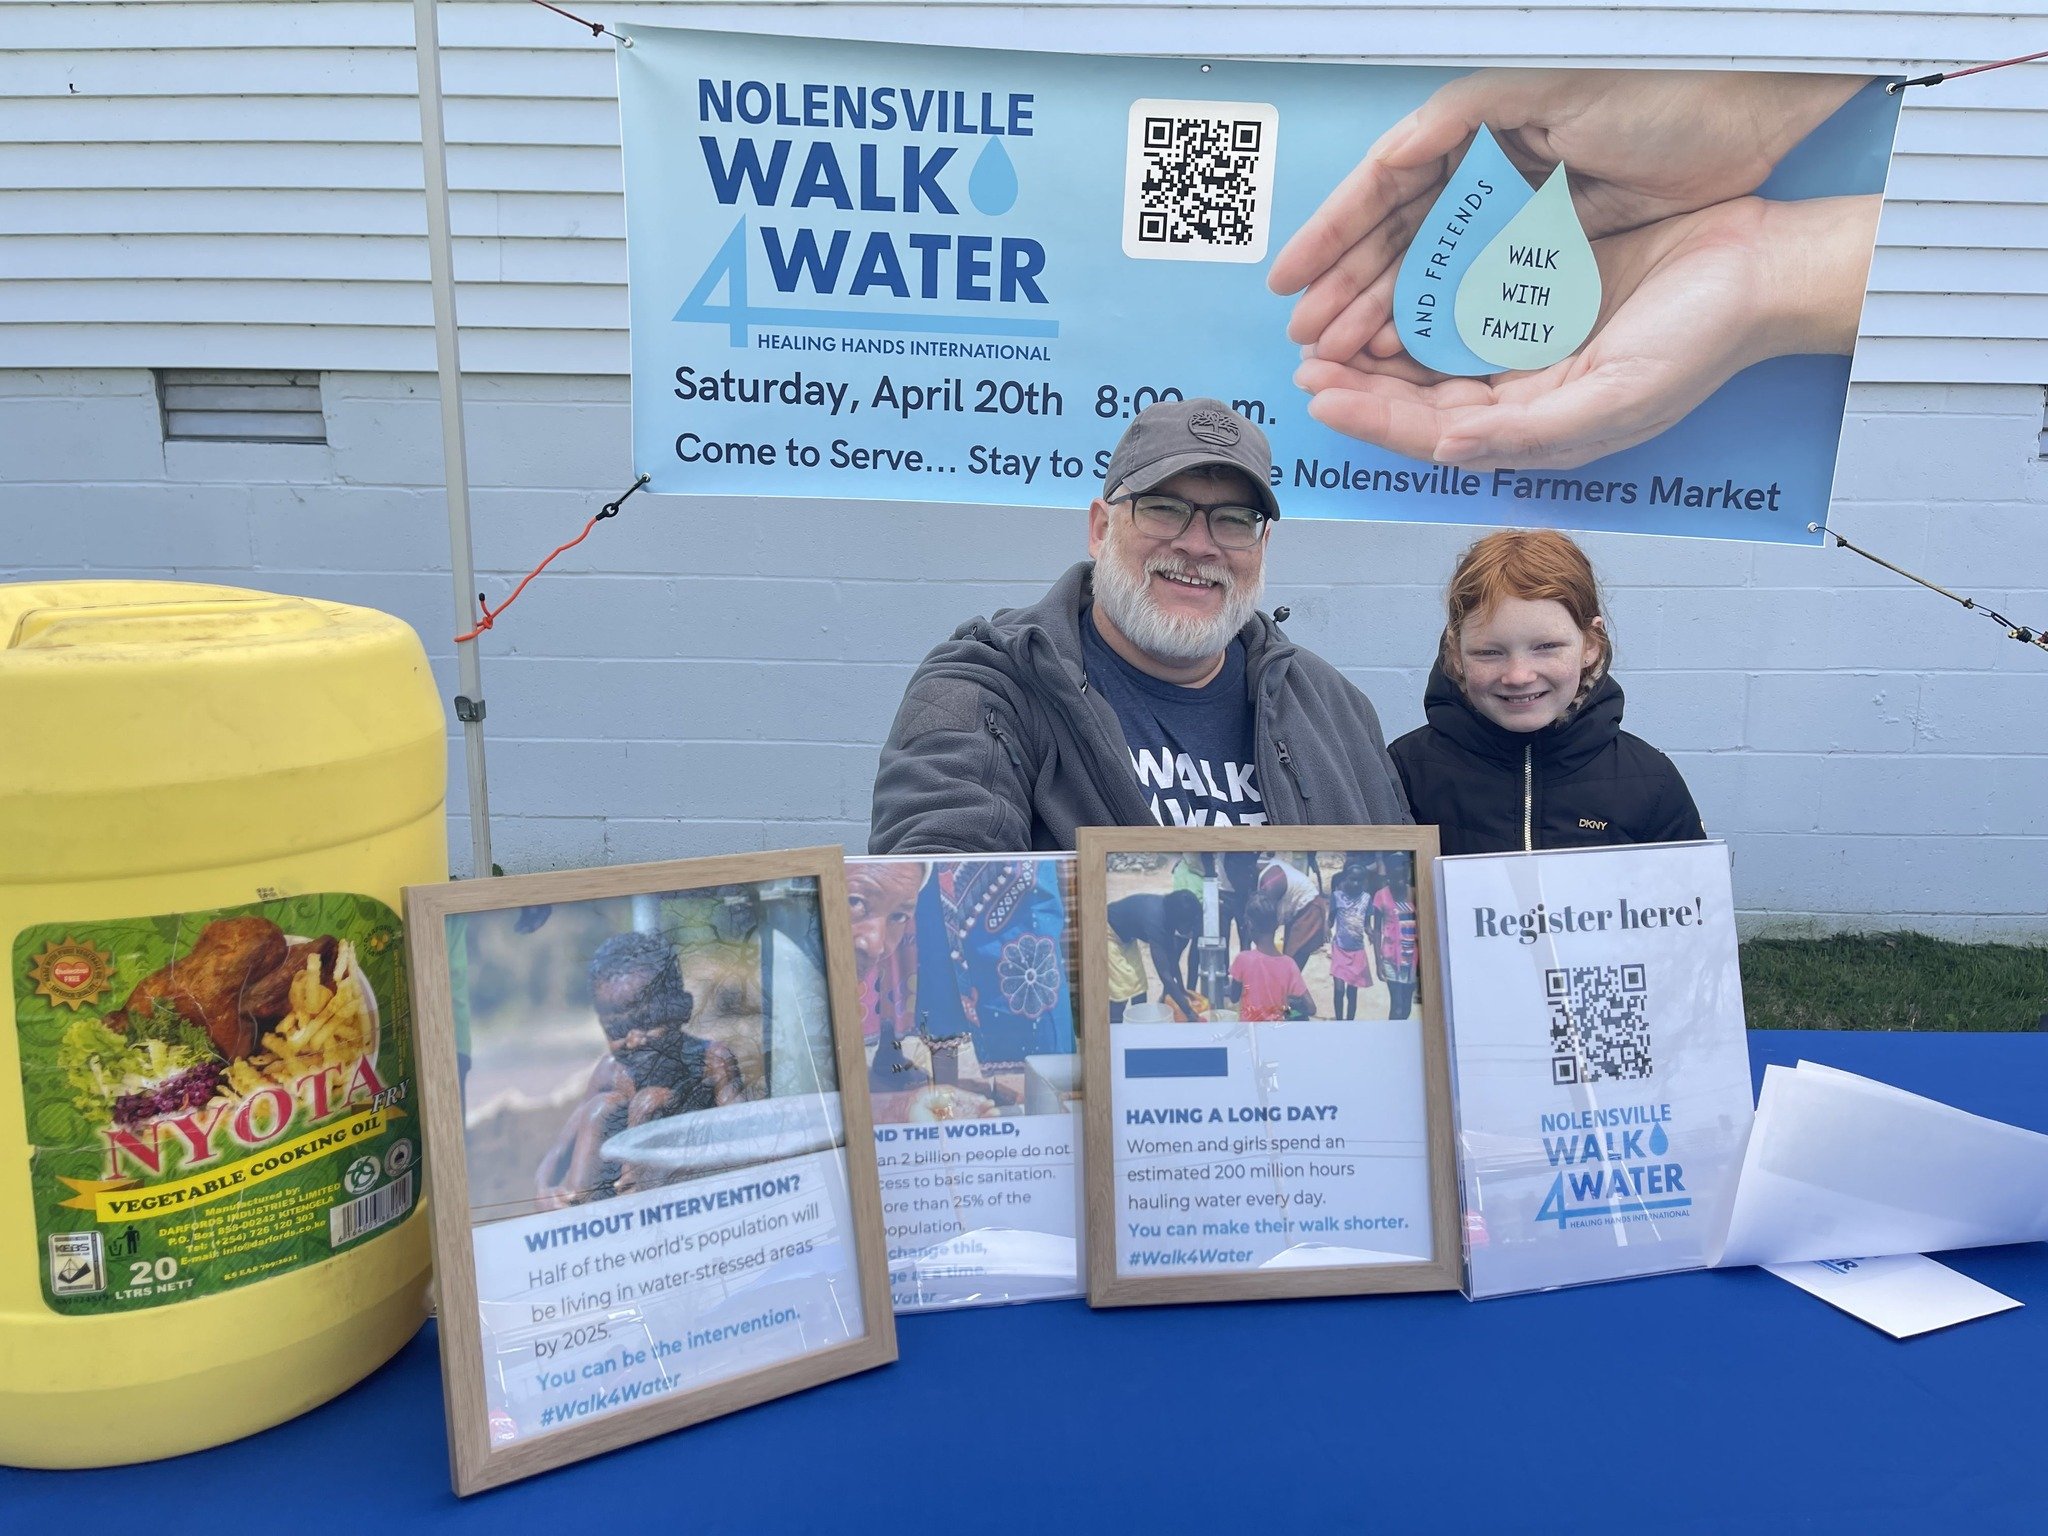 Have you signed up for the Walk4Water 5K happening April 20th? Stop by their booth this Saturday to register!

❄️ Winter Market December-April
📅Saturdays NEW HOURS 10a-1p
📍Mill Creek Church of Christ 
📍7260 Nolensville Rd. Nolensville, TN
🍓 Produ